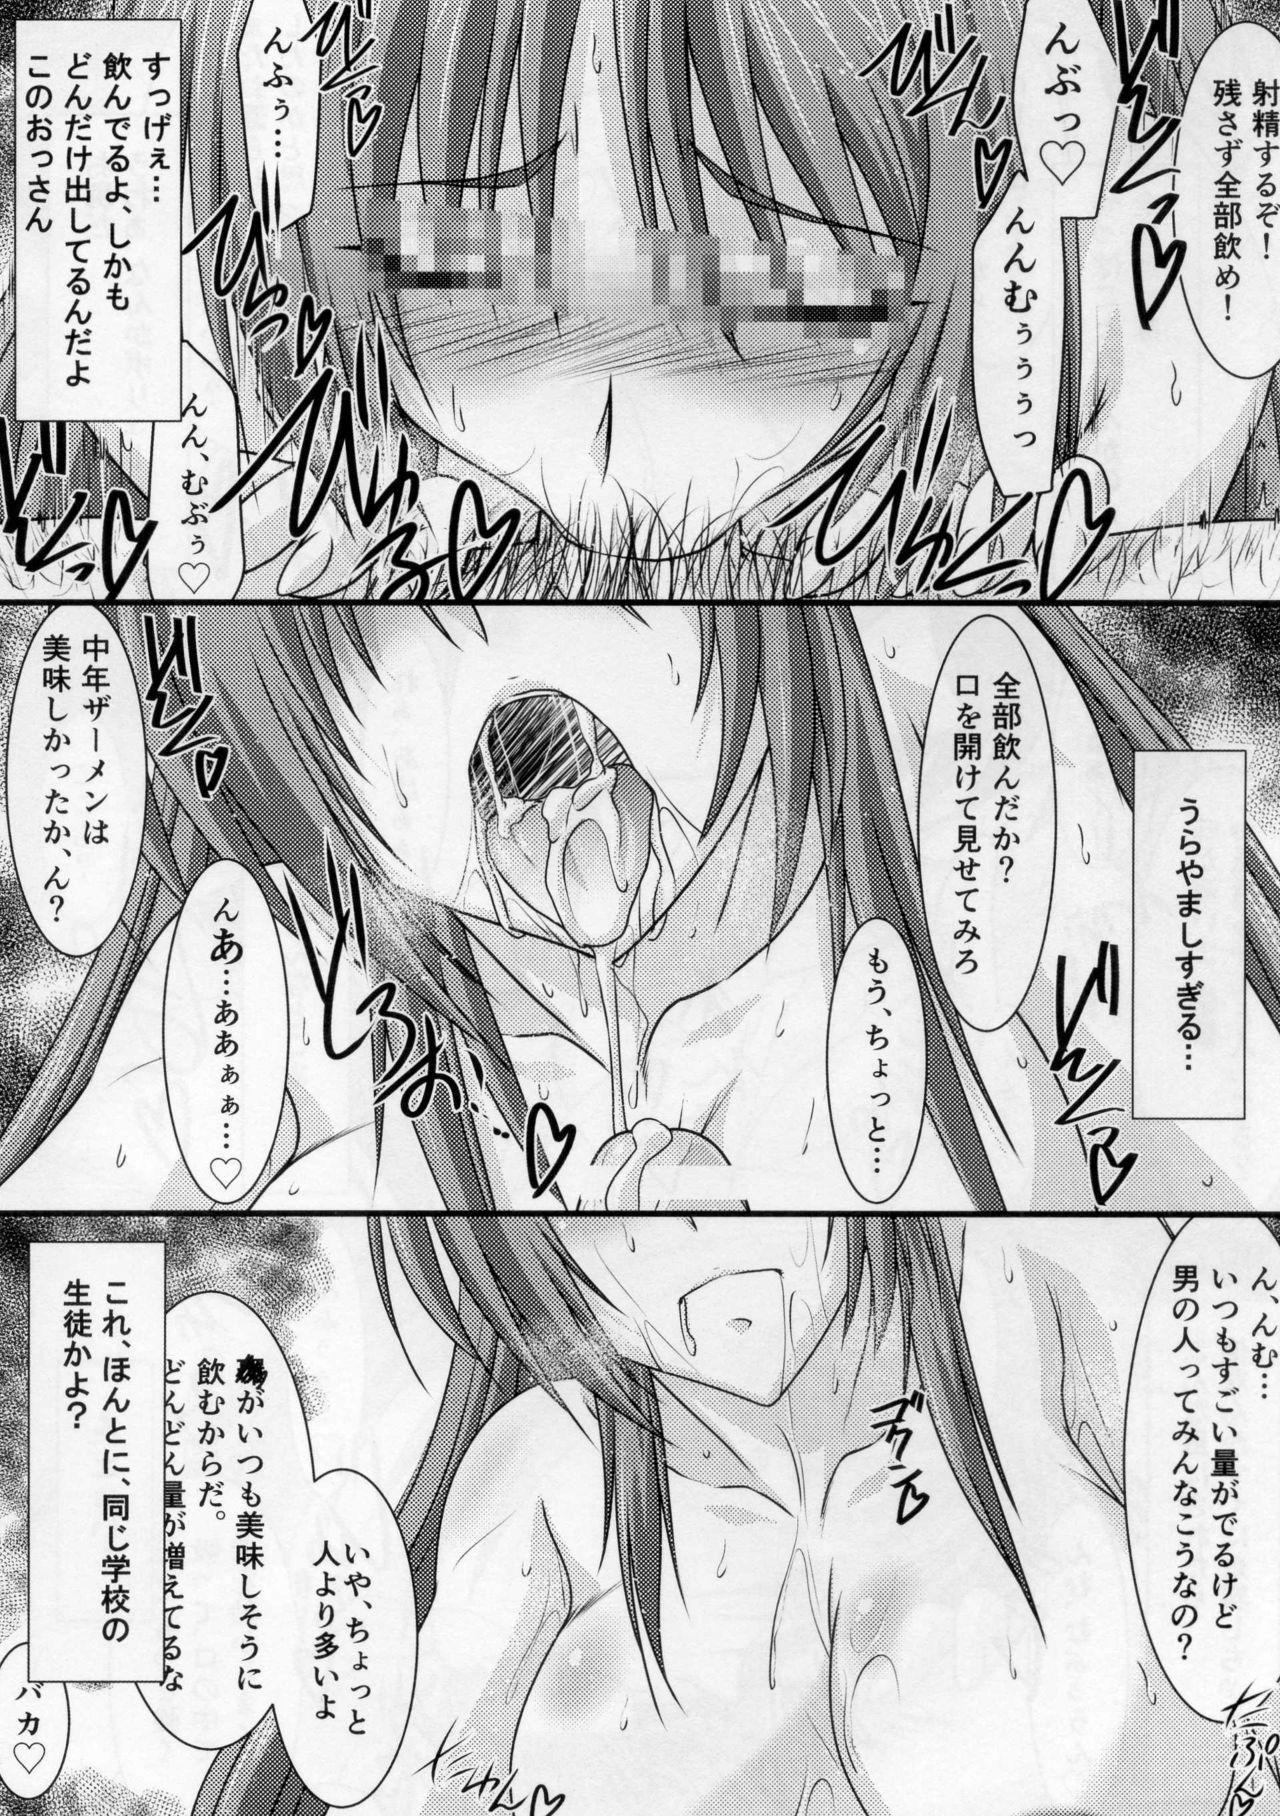 Sperm Astral Bout Ver.31 - Toheart2 Bathroom - Page 11